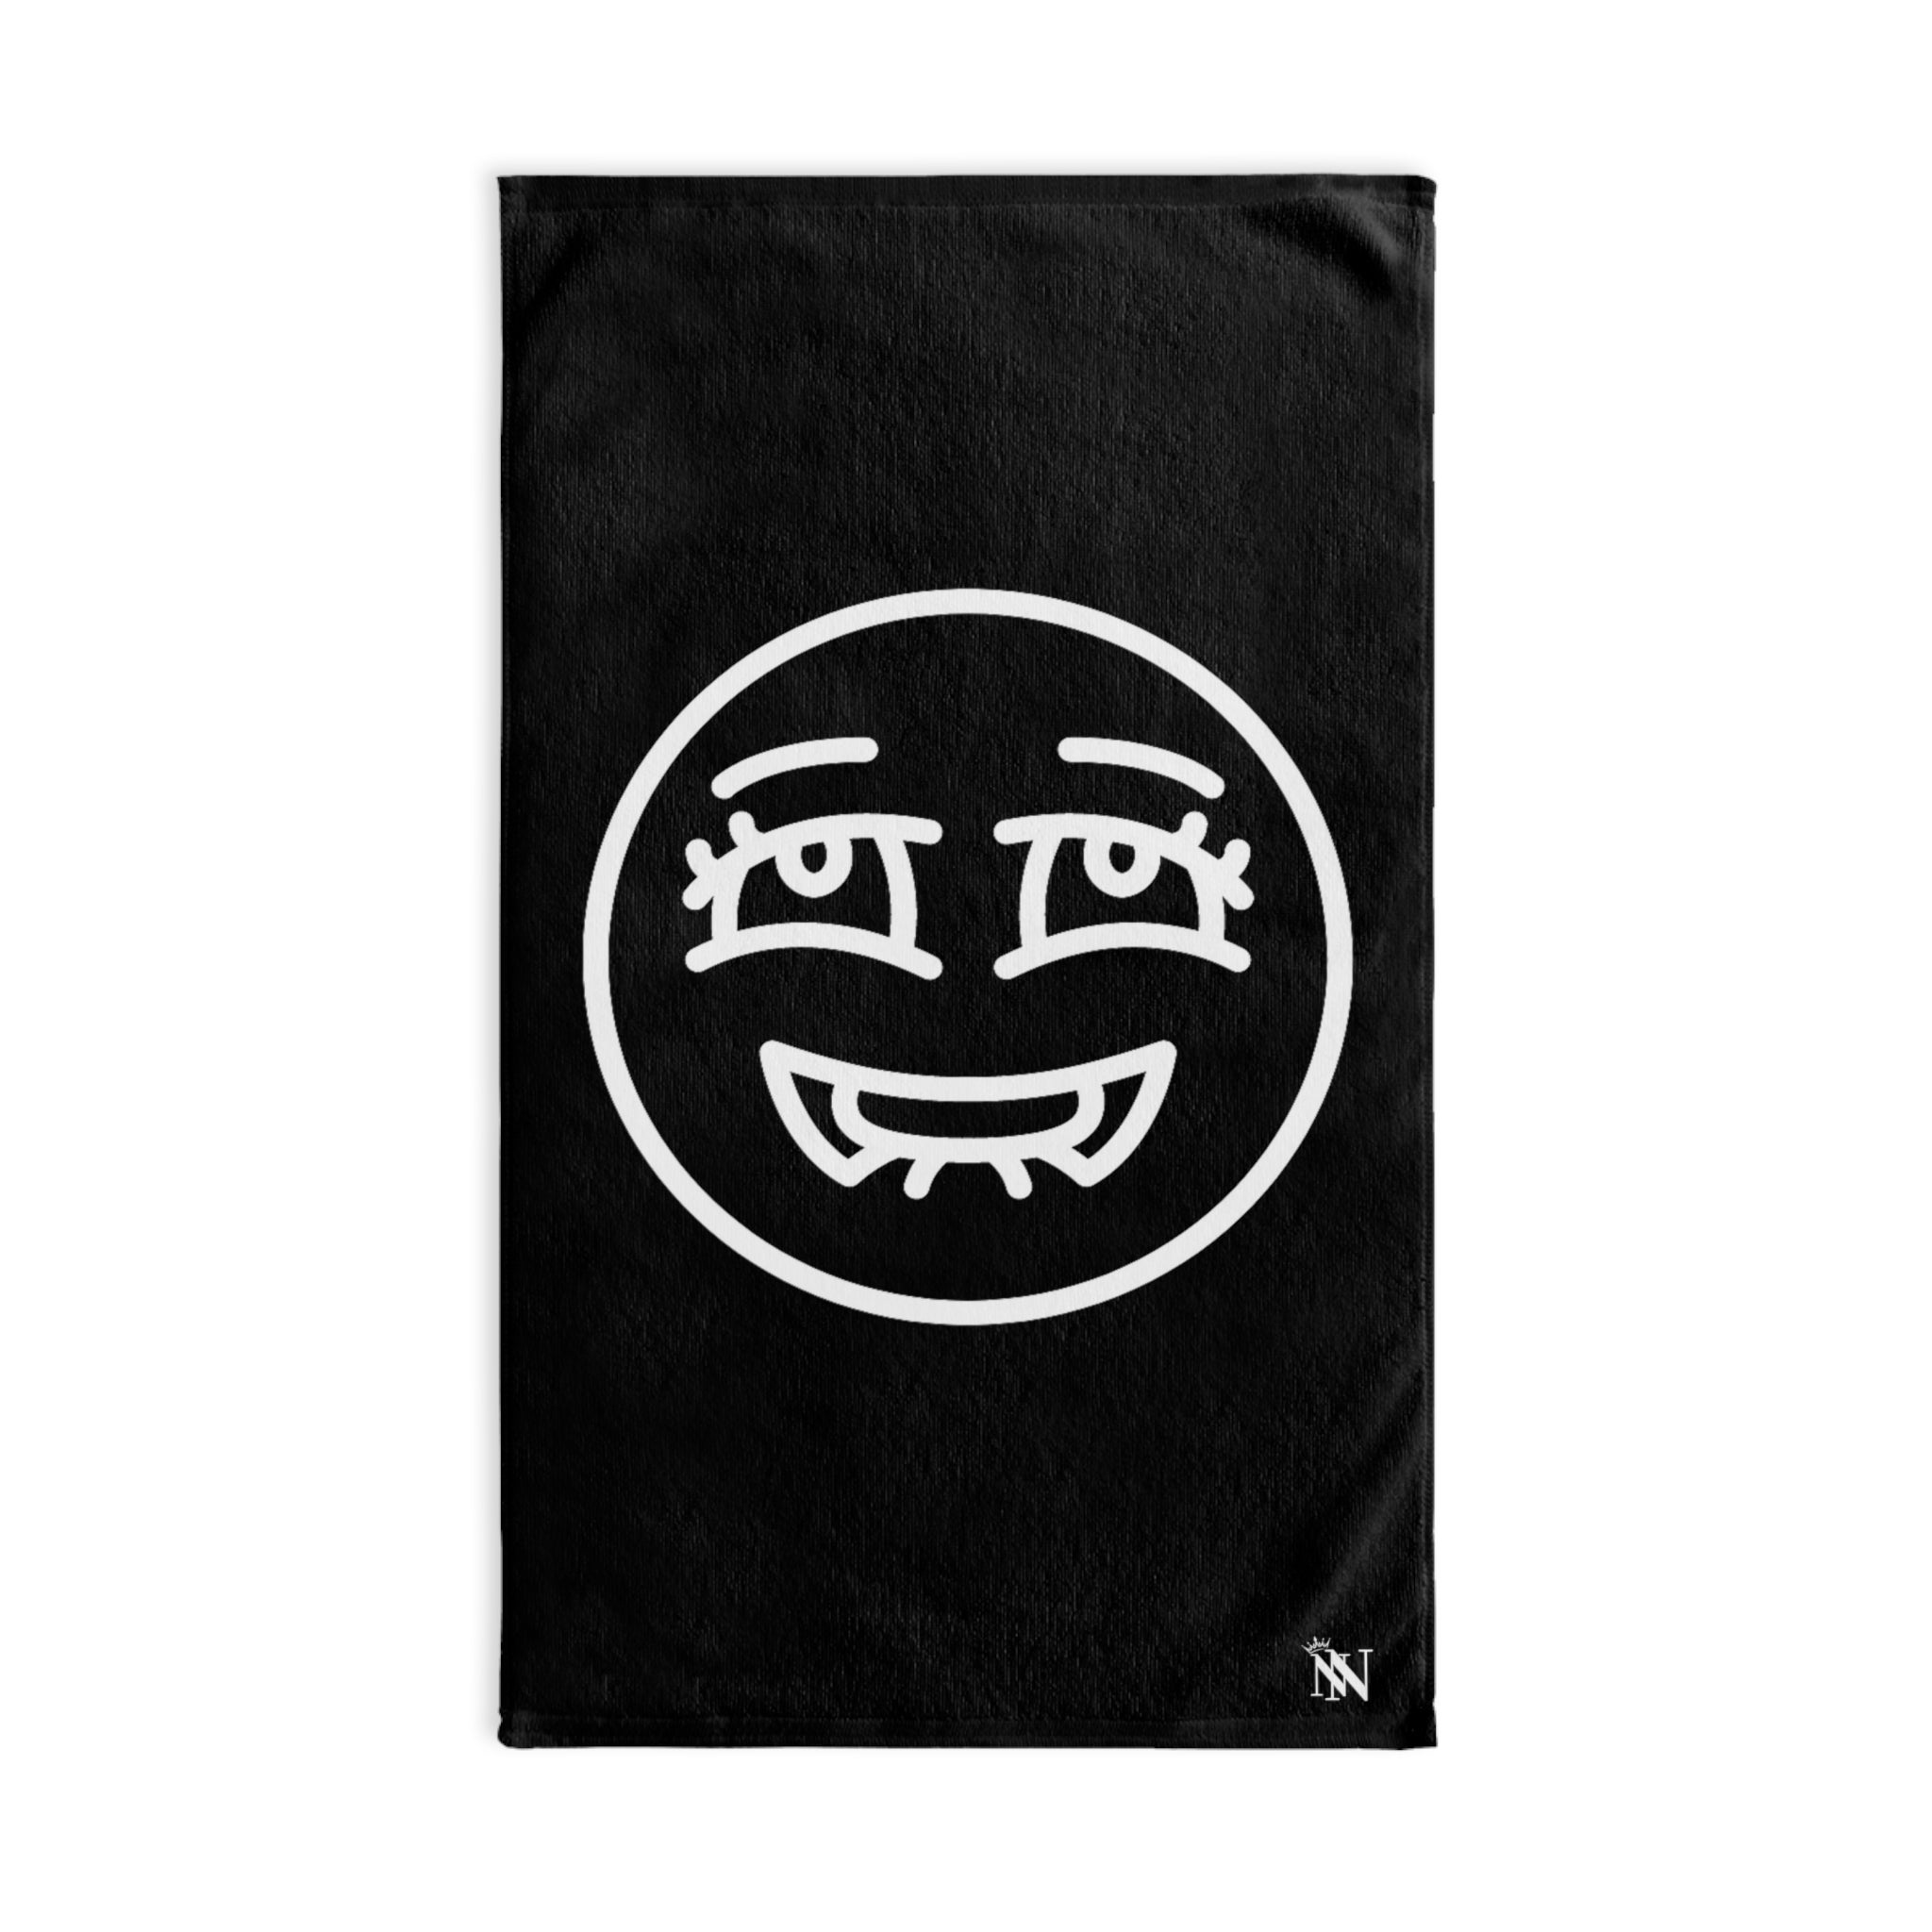 YAY Yes Emoji WhiteBlack | Sexy Gifts for Boyfriend, Funny Towel Romantic Gift for Wedding Couple Fiance First Year 2nd Anniversary Valentines, Party Gag Gifts, Joke Humor Cloth for Husband Men BF NECTAR NAPKINS